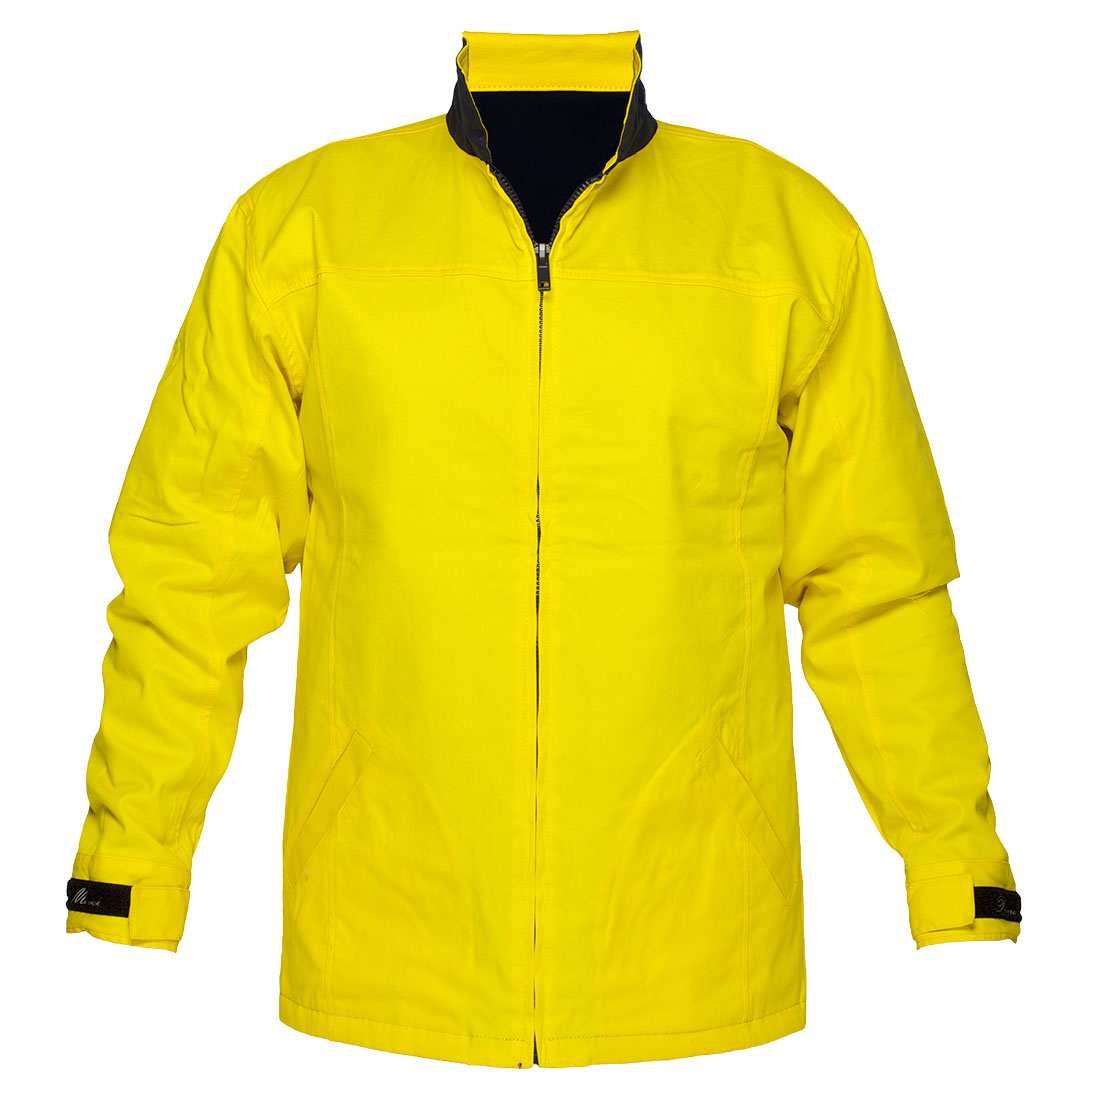 Portwest 100% Cotton Drill Jacket with Stain Repellent Finish (MJ288)